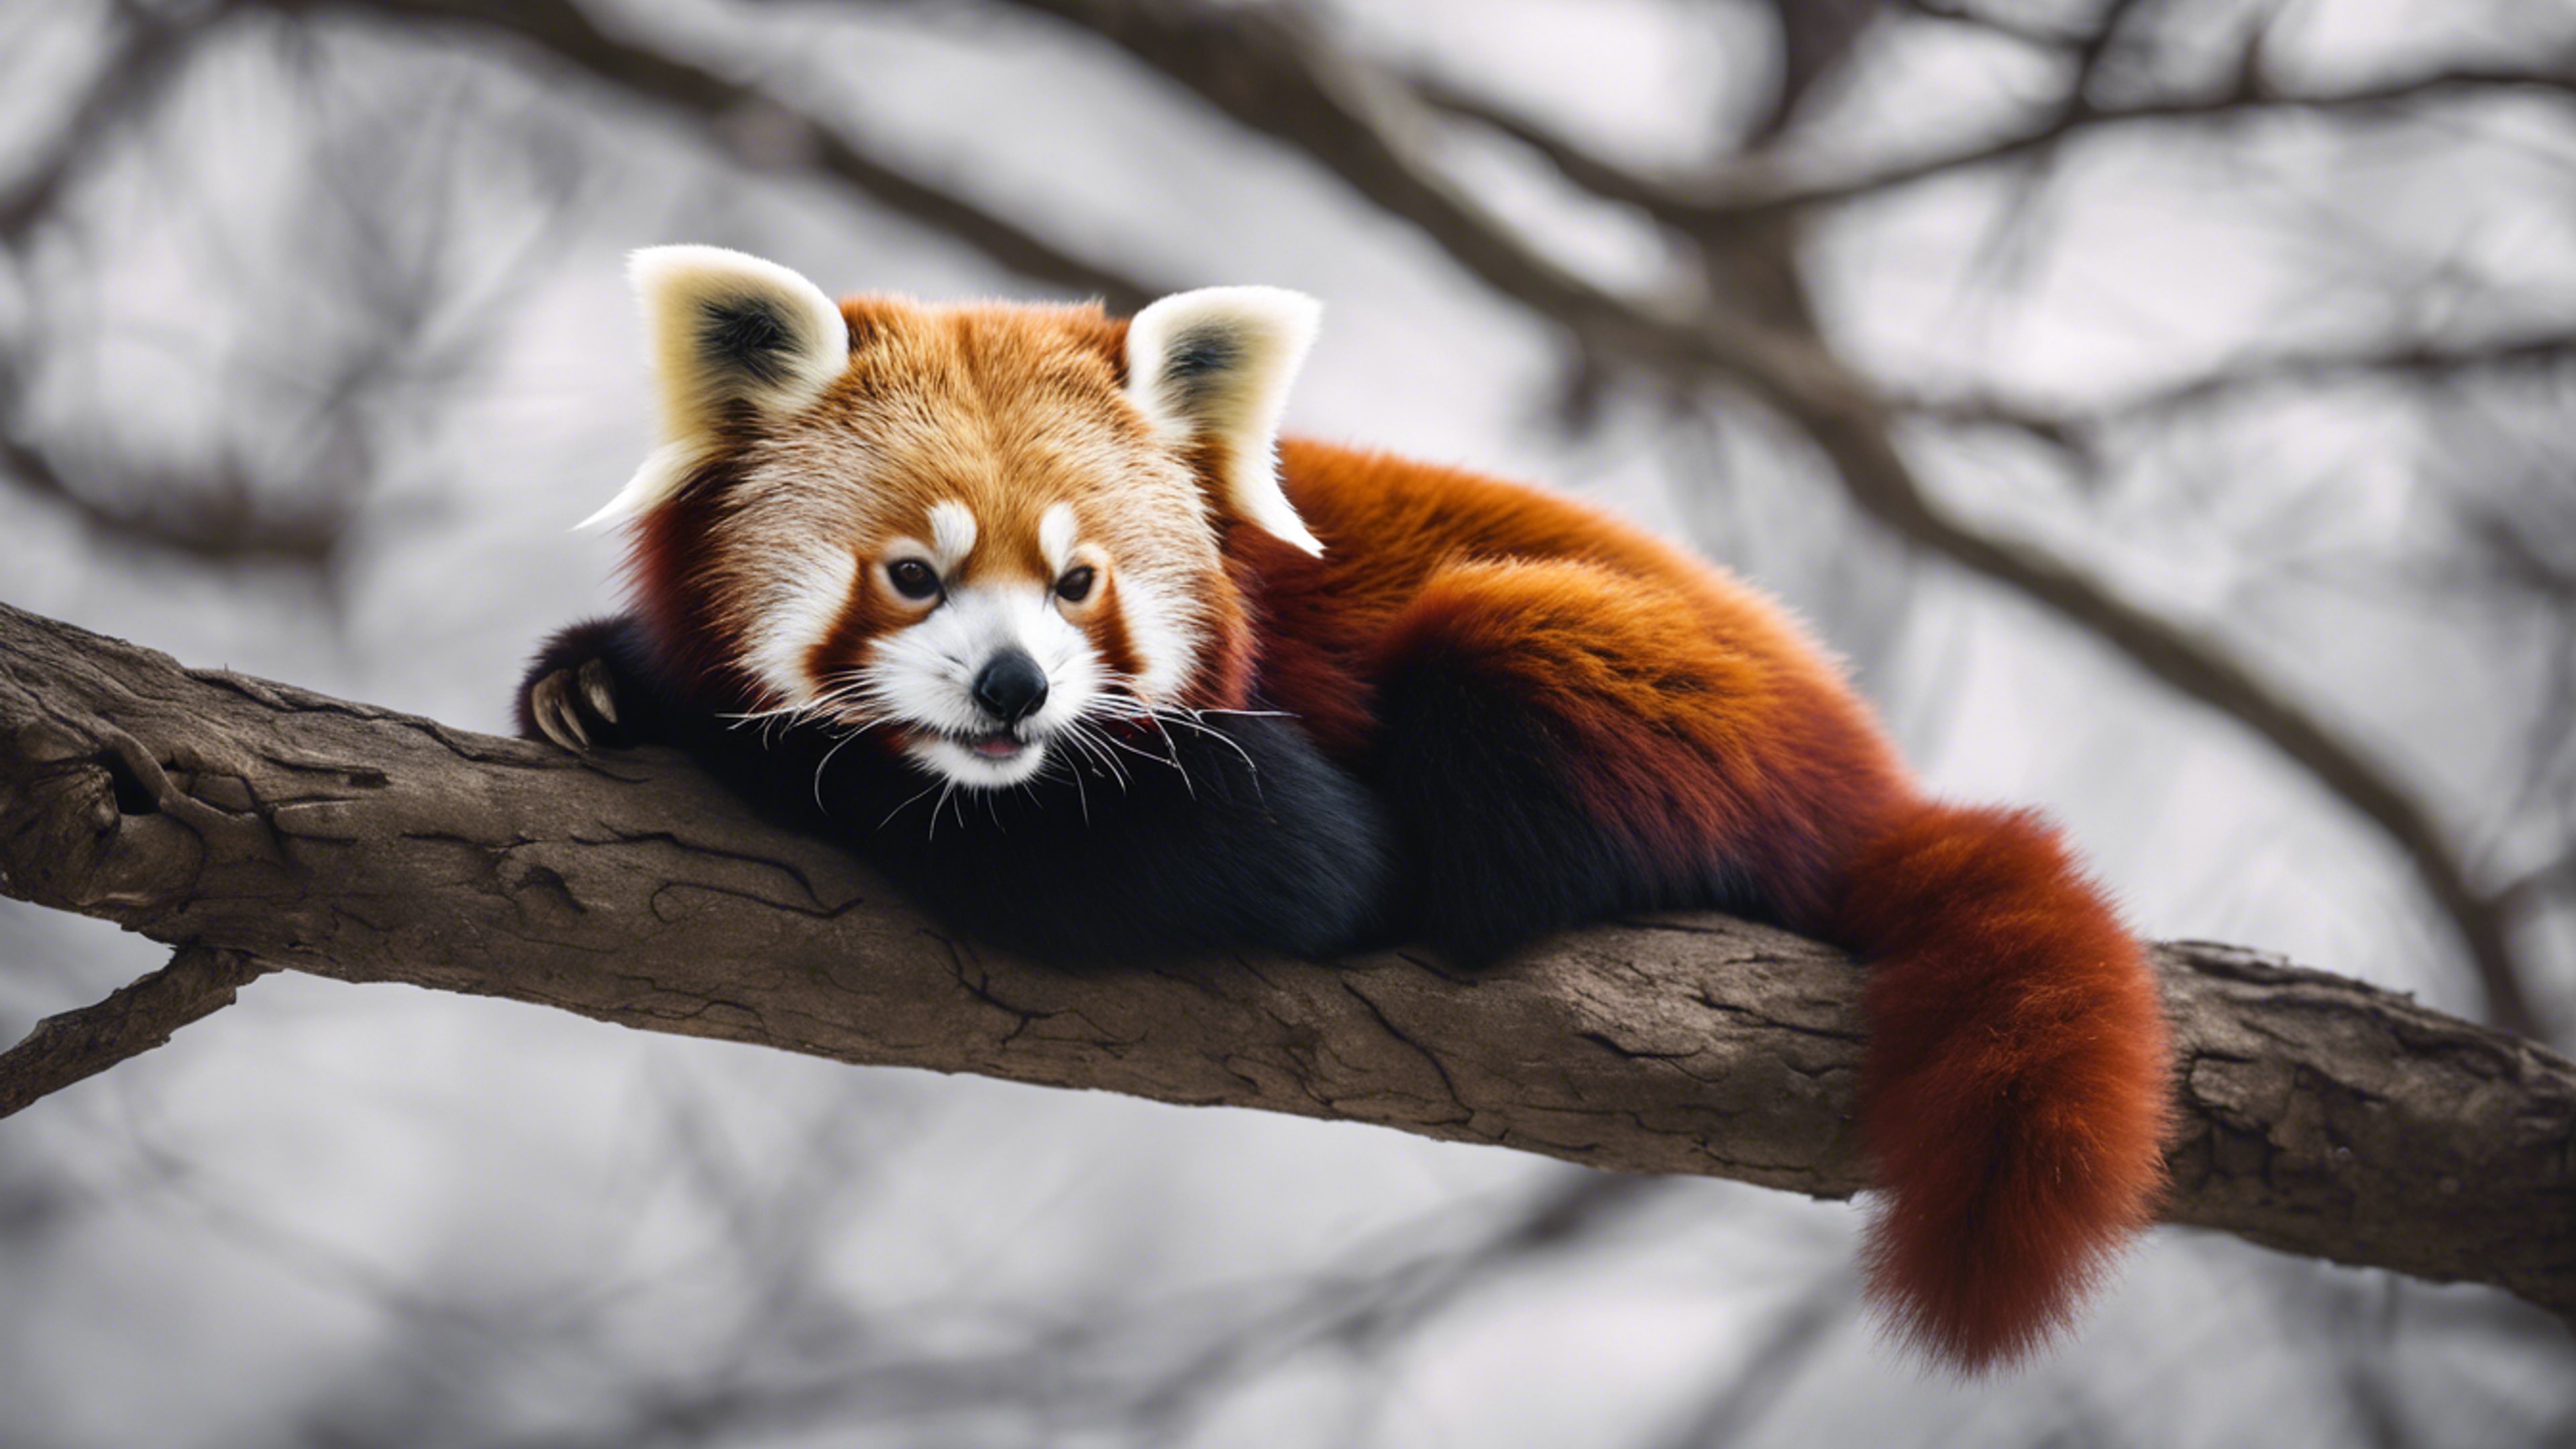 A red panda enjoying a peaceful nap on a thick tree branch. Tapet[0844f7d1c6274207ac91]